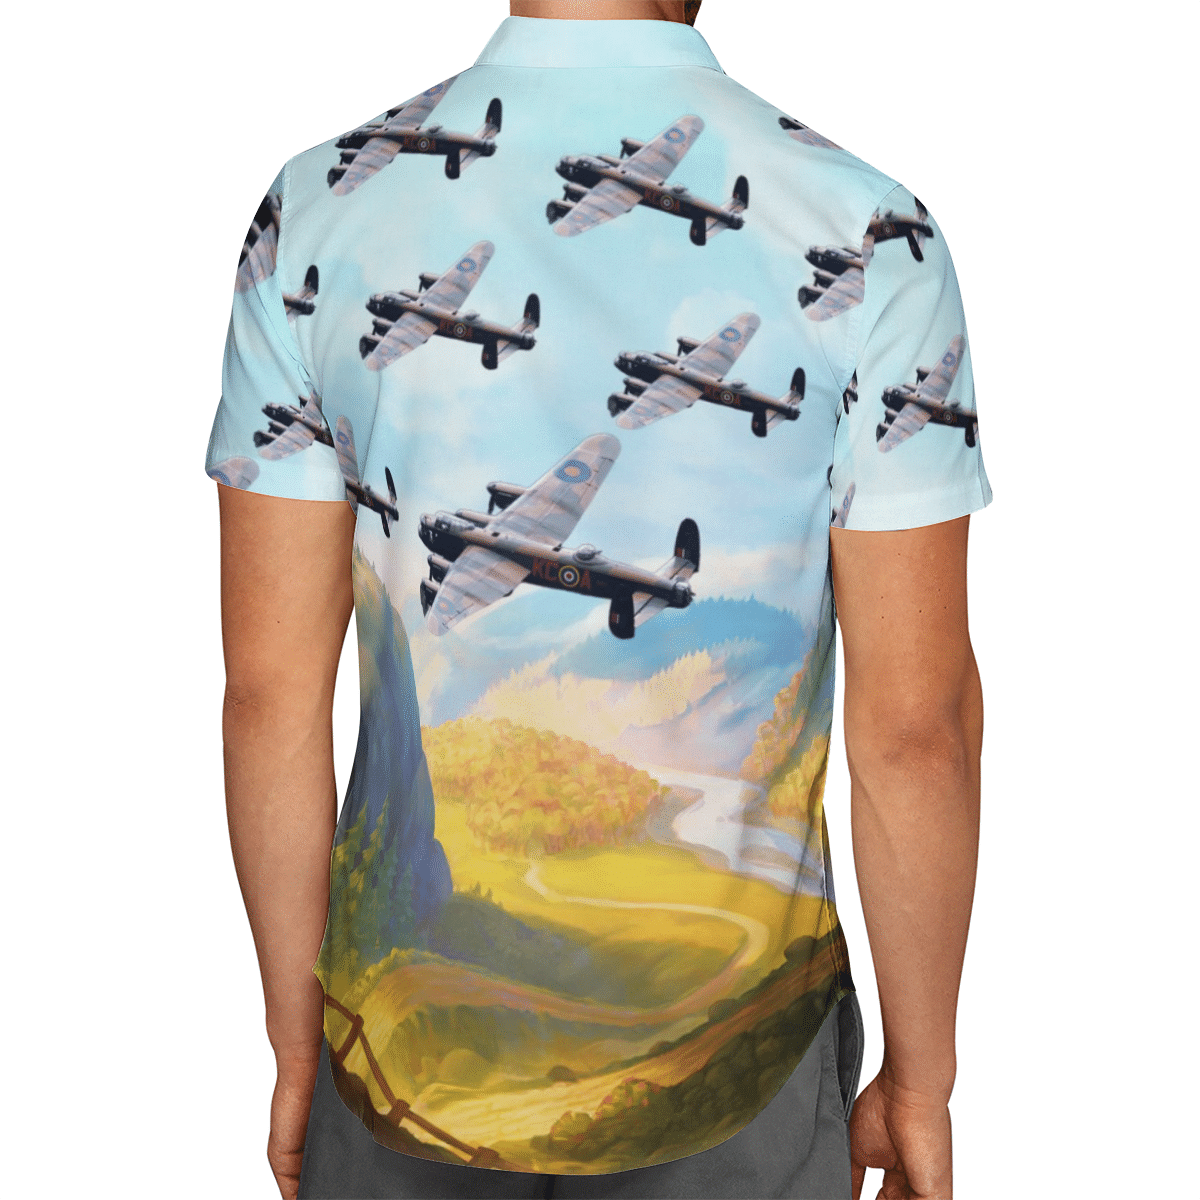 Going to the beach with a quality shirt 193